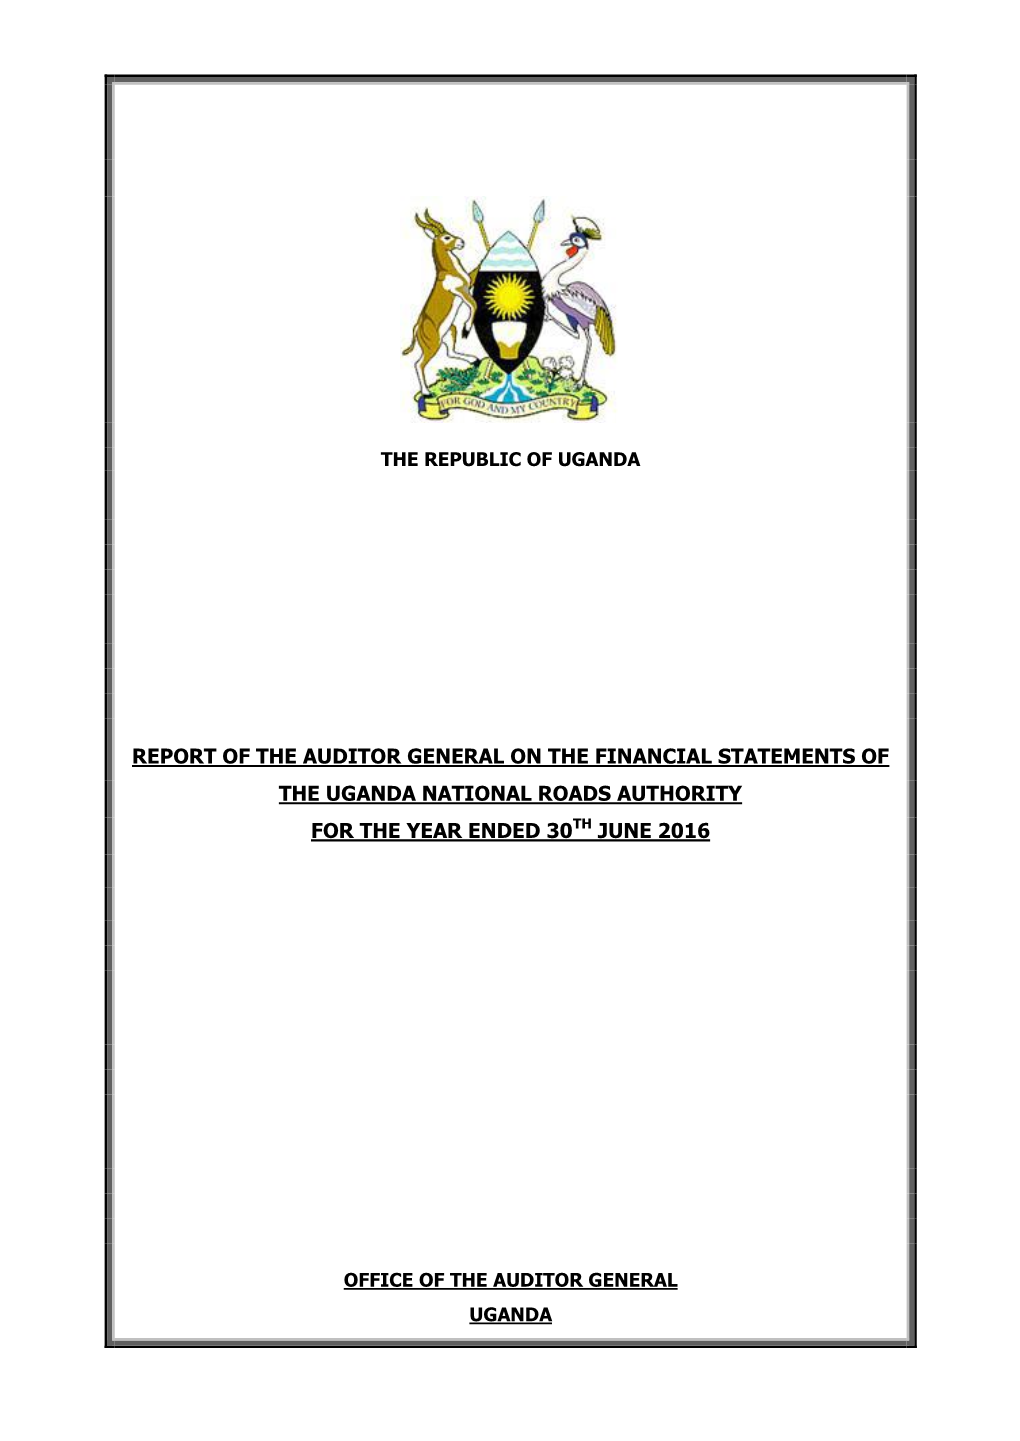 Report of the Auditor General on the Financial Statements of the Uganda National Roads Authority for the Year Ended 30Th June 2016